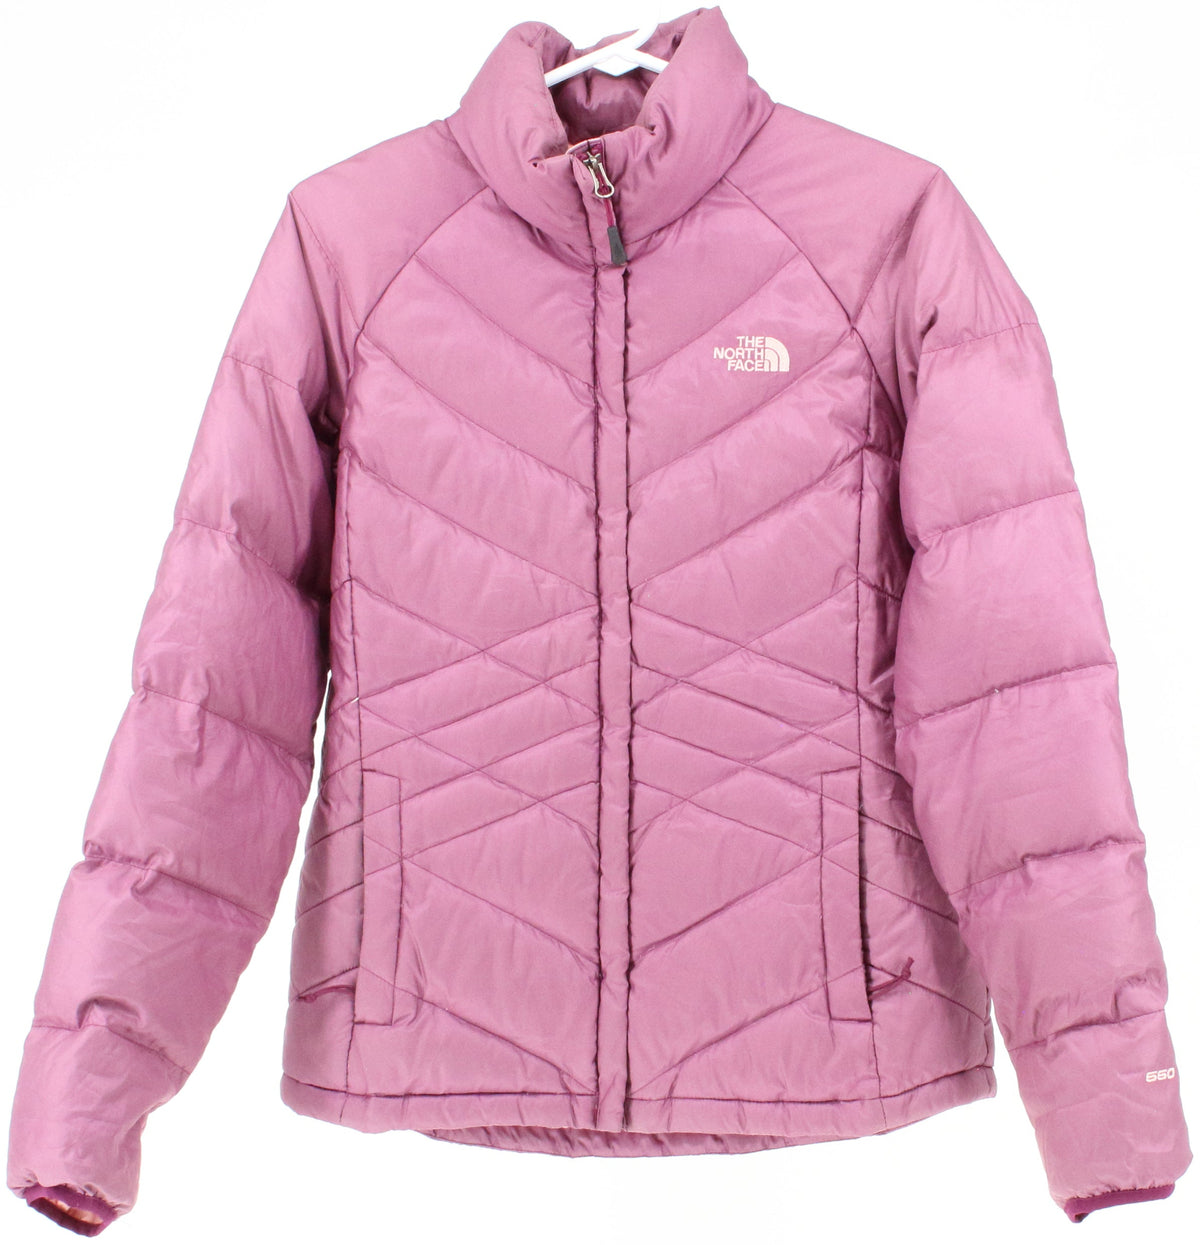 The North Face 550 Glossy Pink Women's Down Jacket